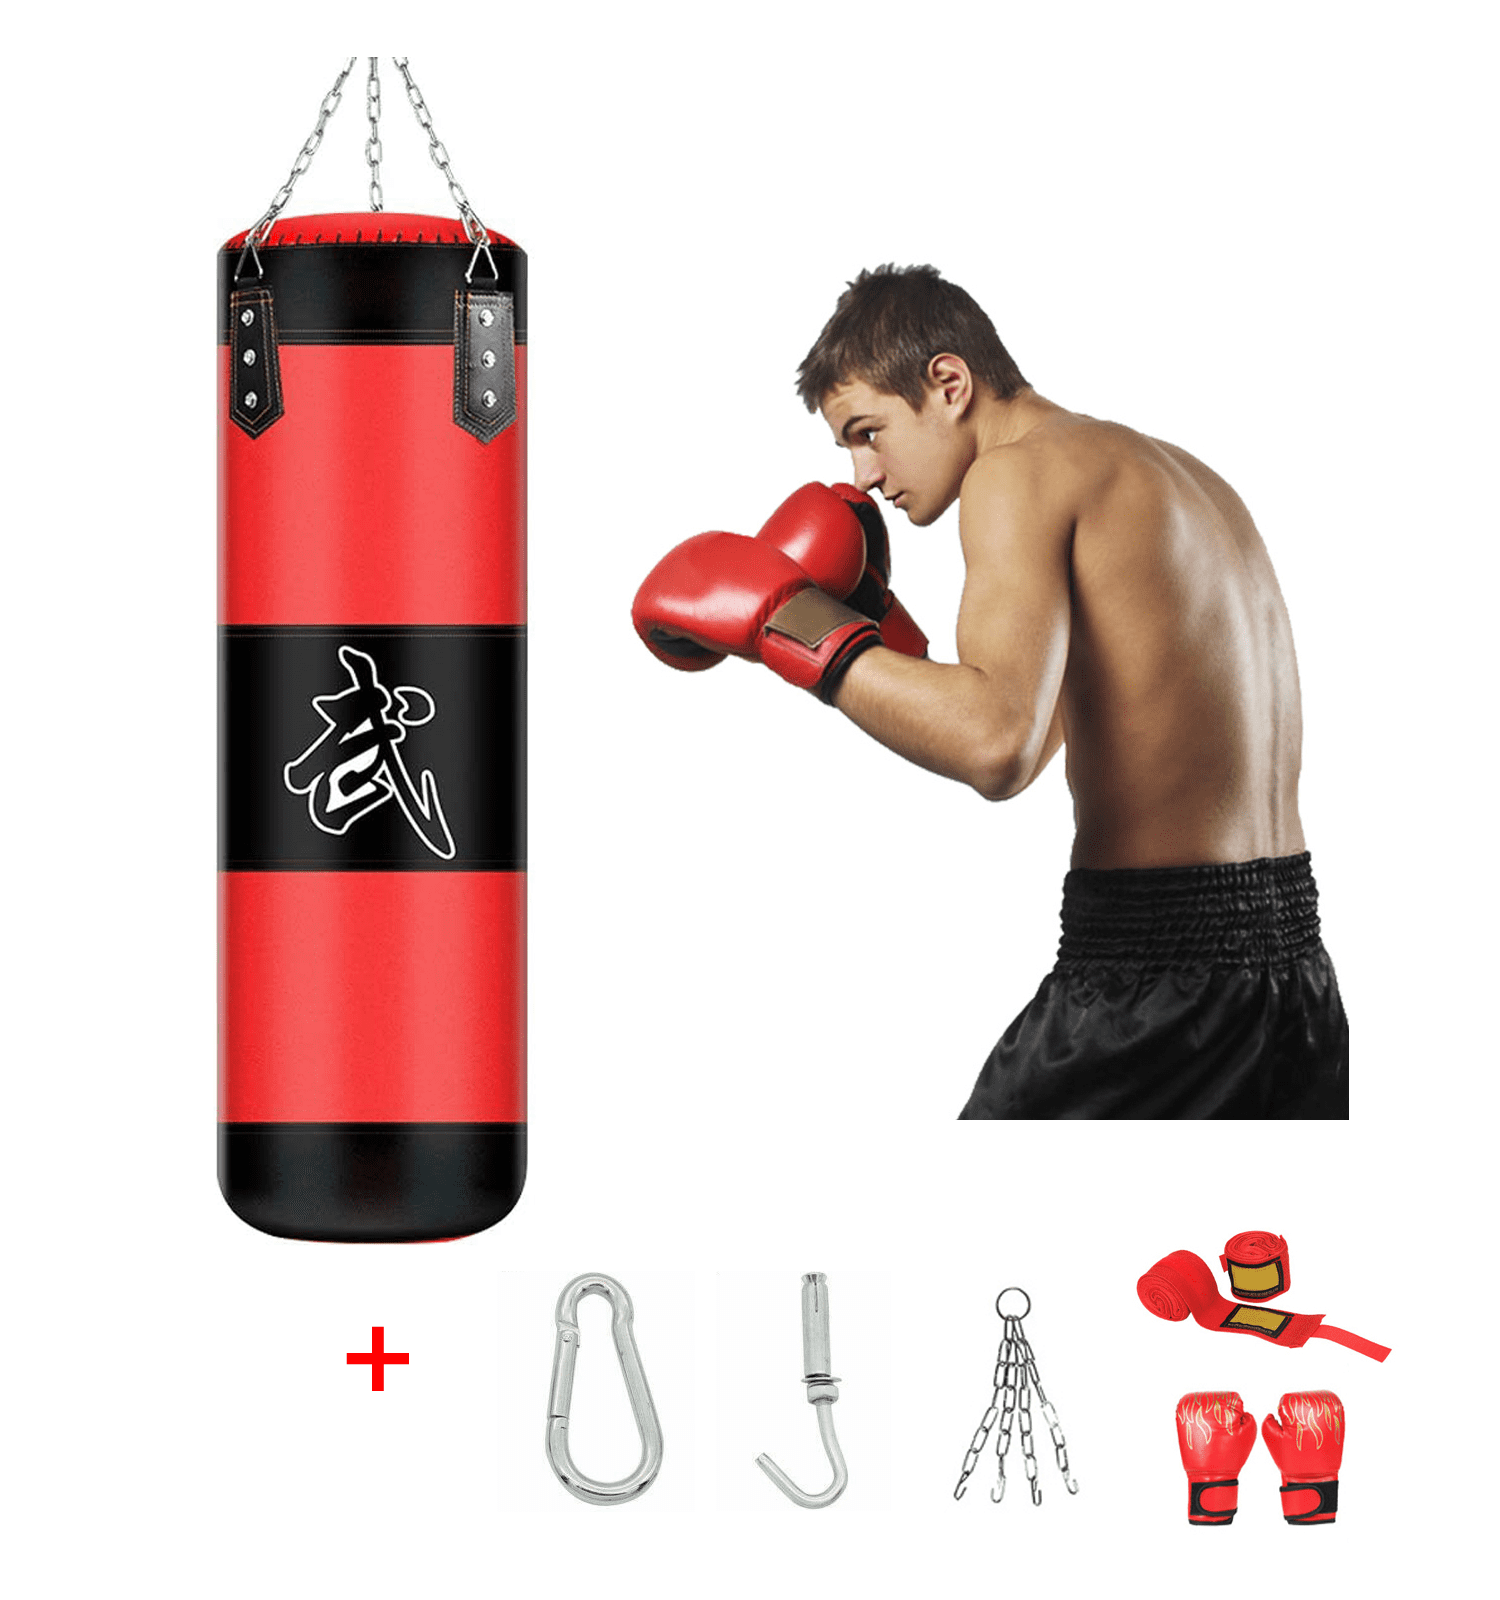 Amazon.com : UFC Standard Heavy Bag, 100 lb Boxing and MMA Punching Bag :  Sports & Outdoors